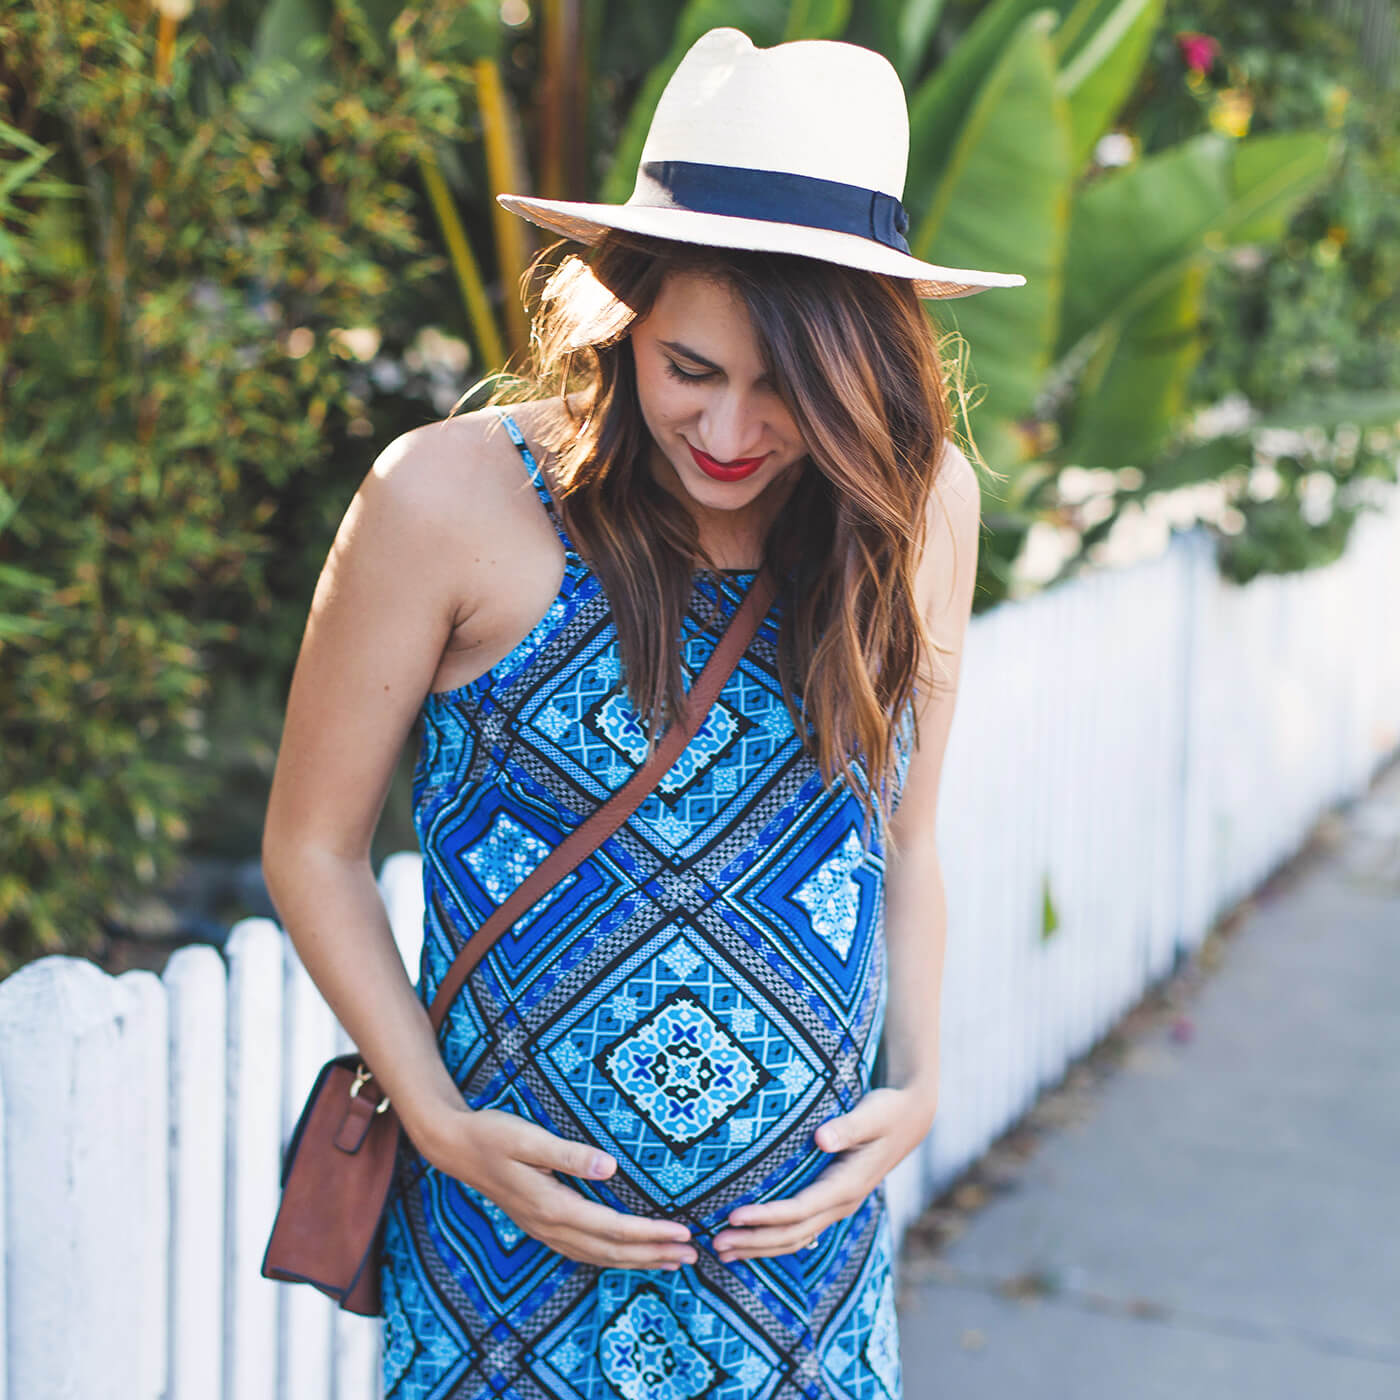 What are the best dress styles for pregnancy? | Stitch Fix Style